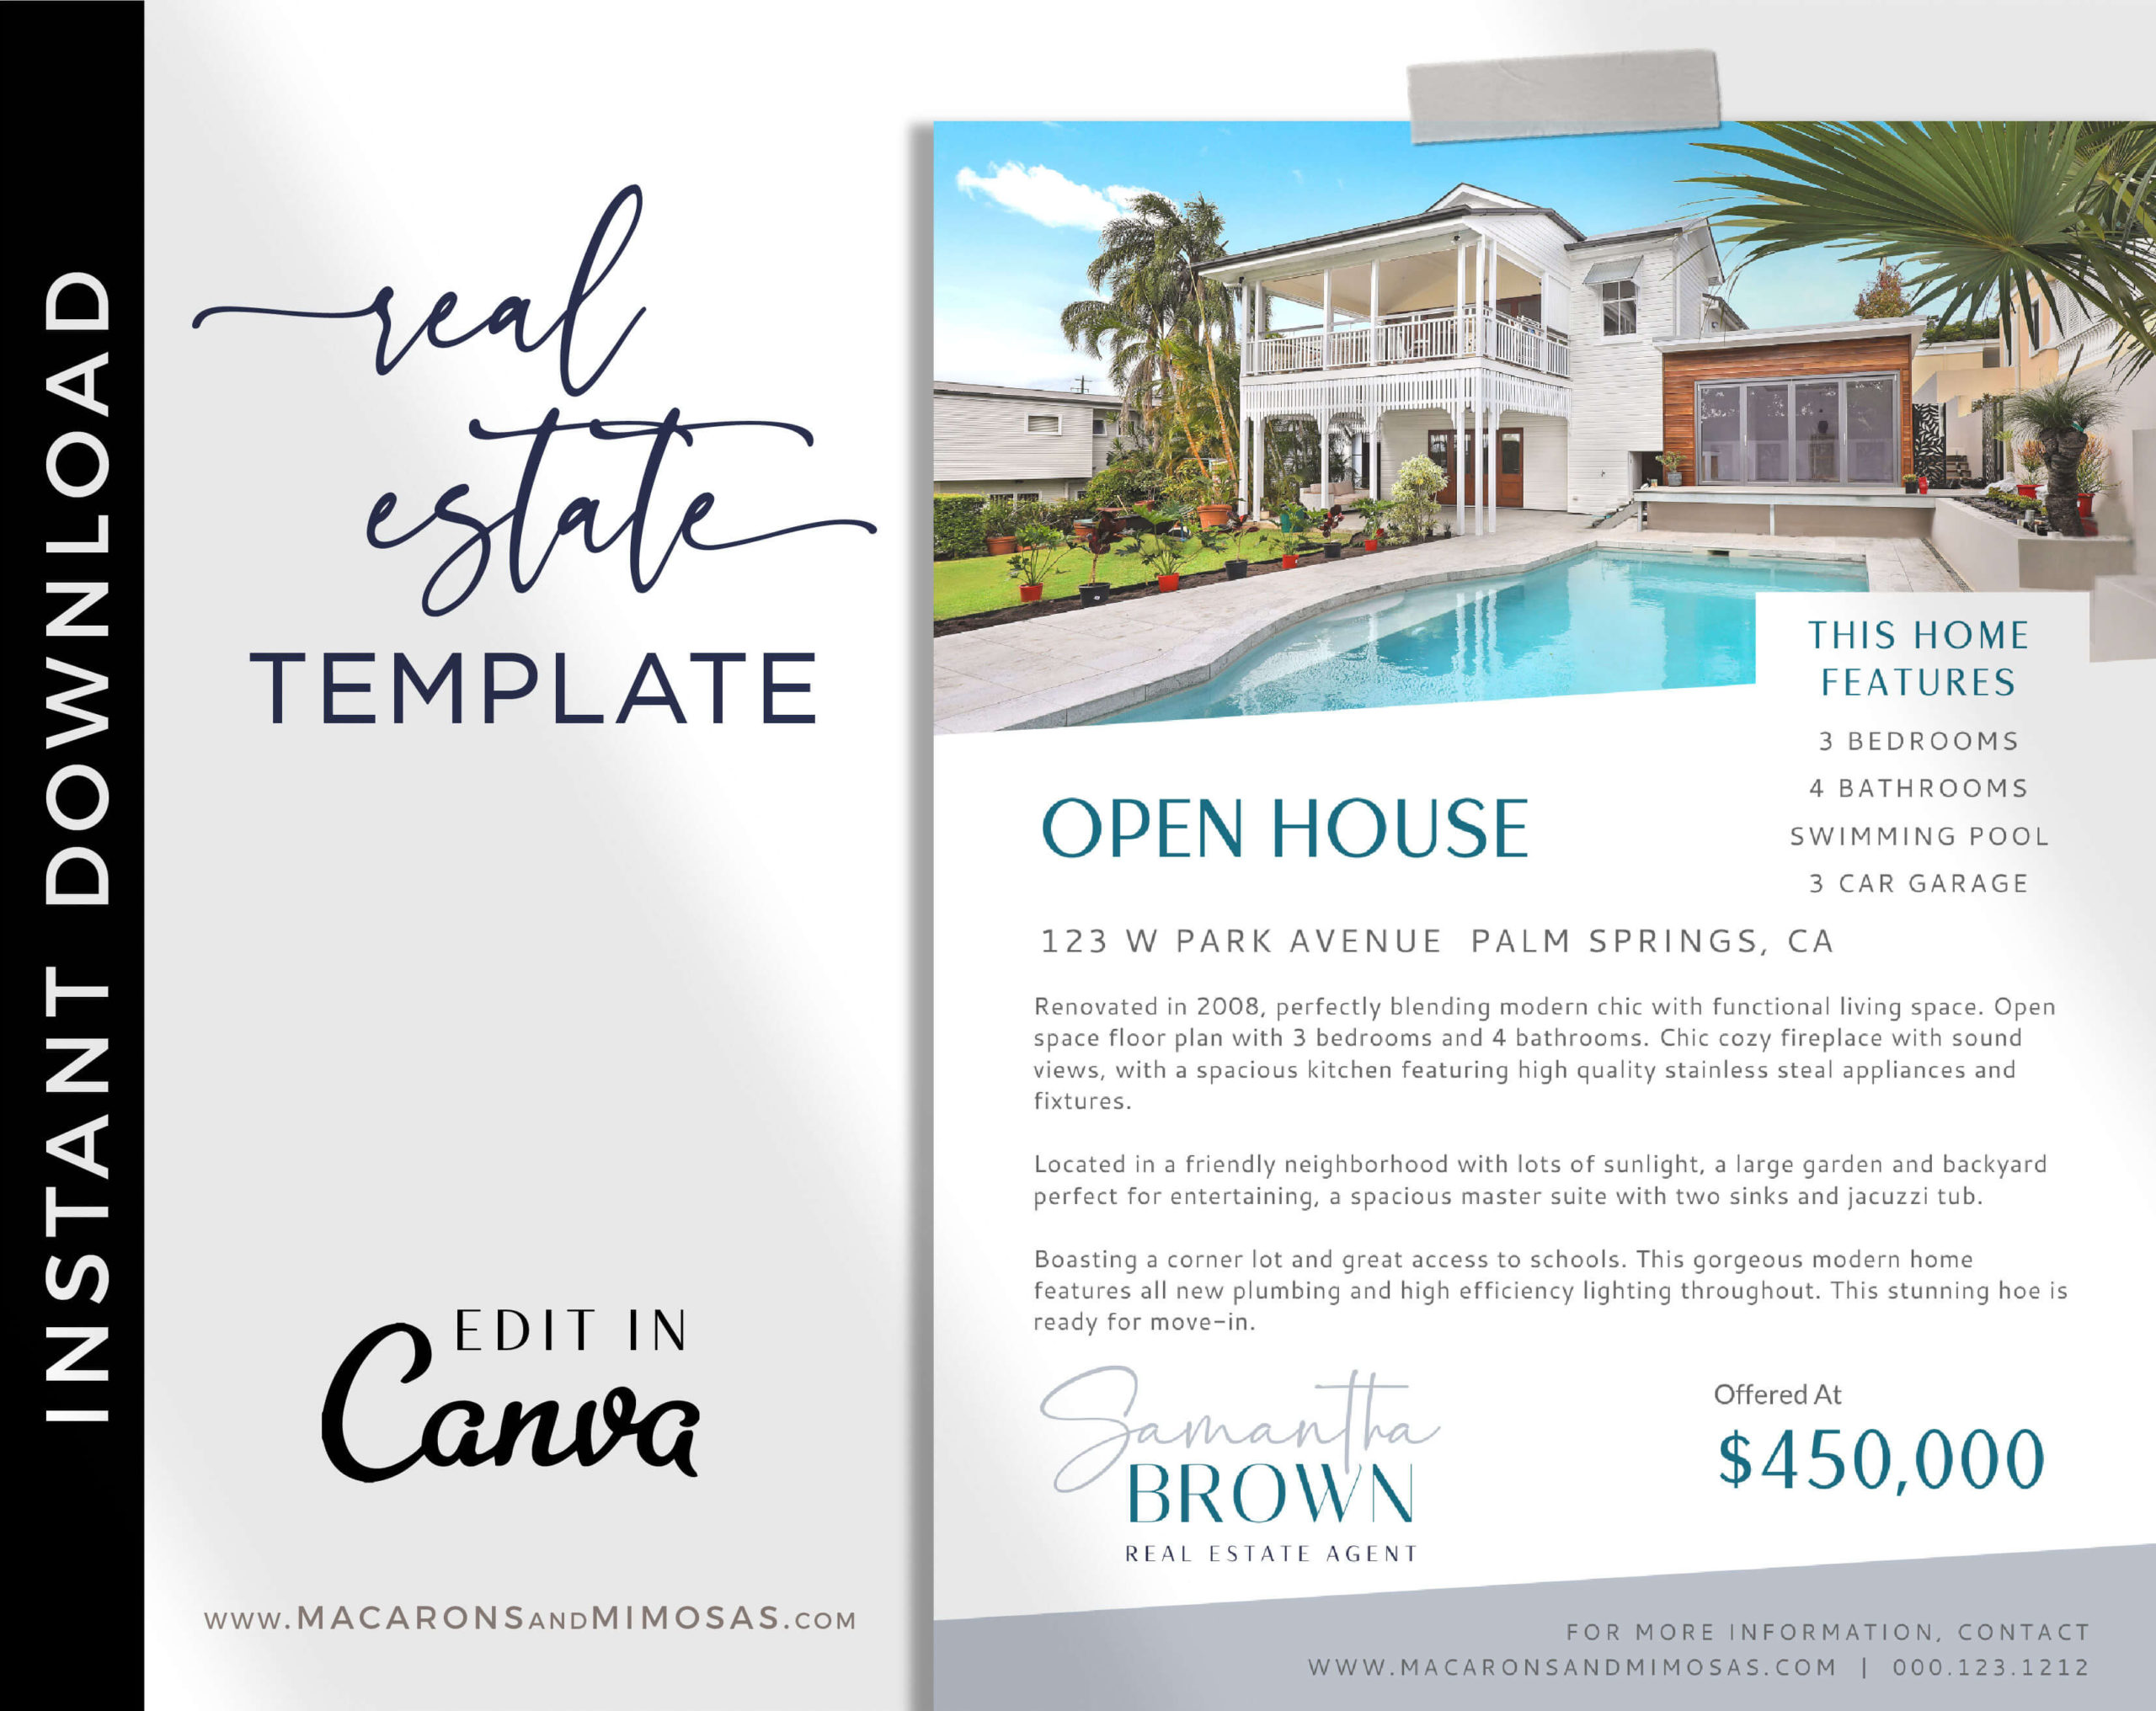 Real Estate Open House Flyer Template, Canva Marketing New House Listing Design, Just Listed Home Flyer Sheet, House for Sale Template